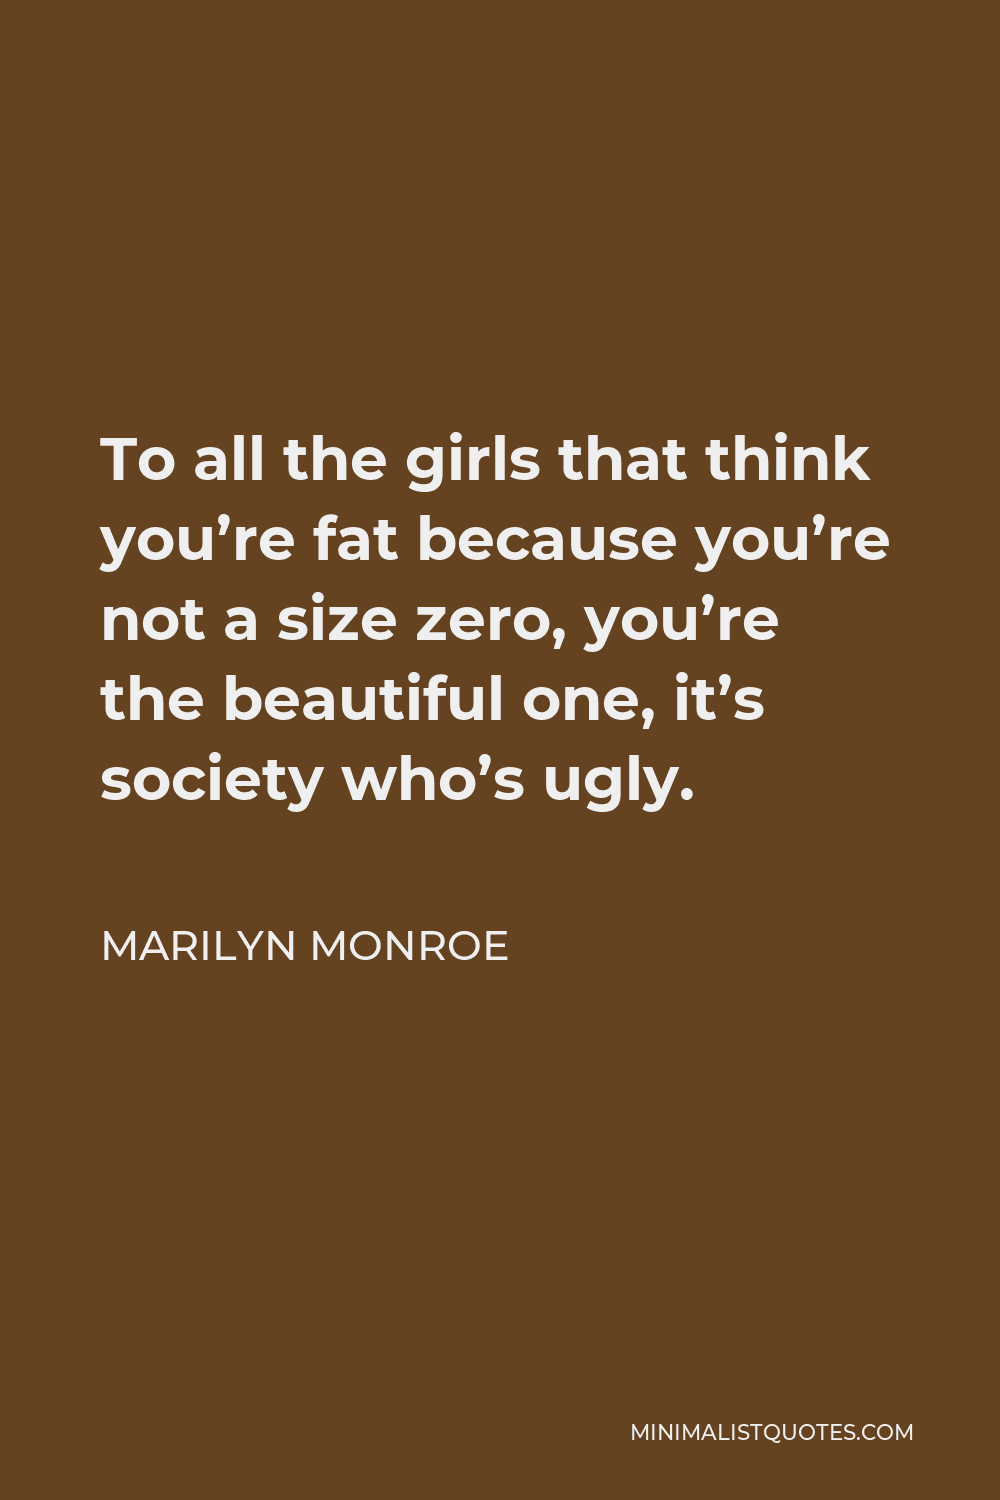 Marilyn Monroe Quote - To all the girls that think you’re fat because you’re not a size zero, you’re the beautiful one, it’s society who’s ugly.